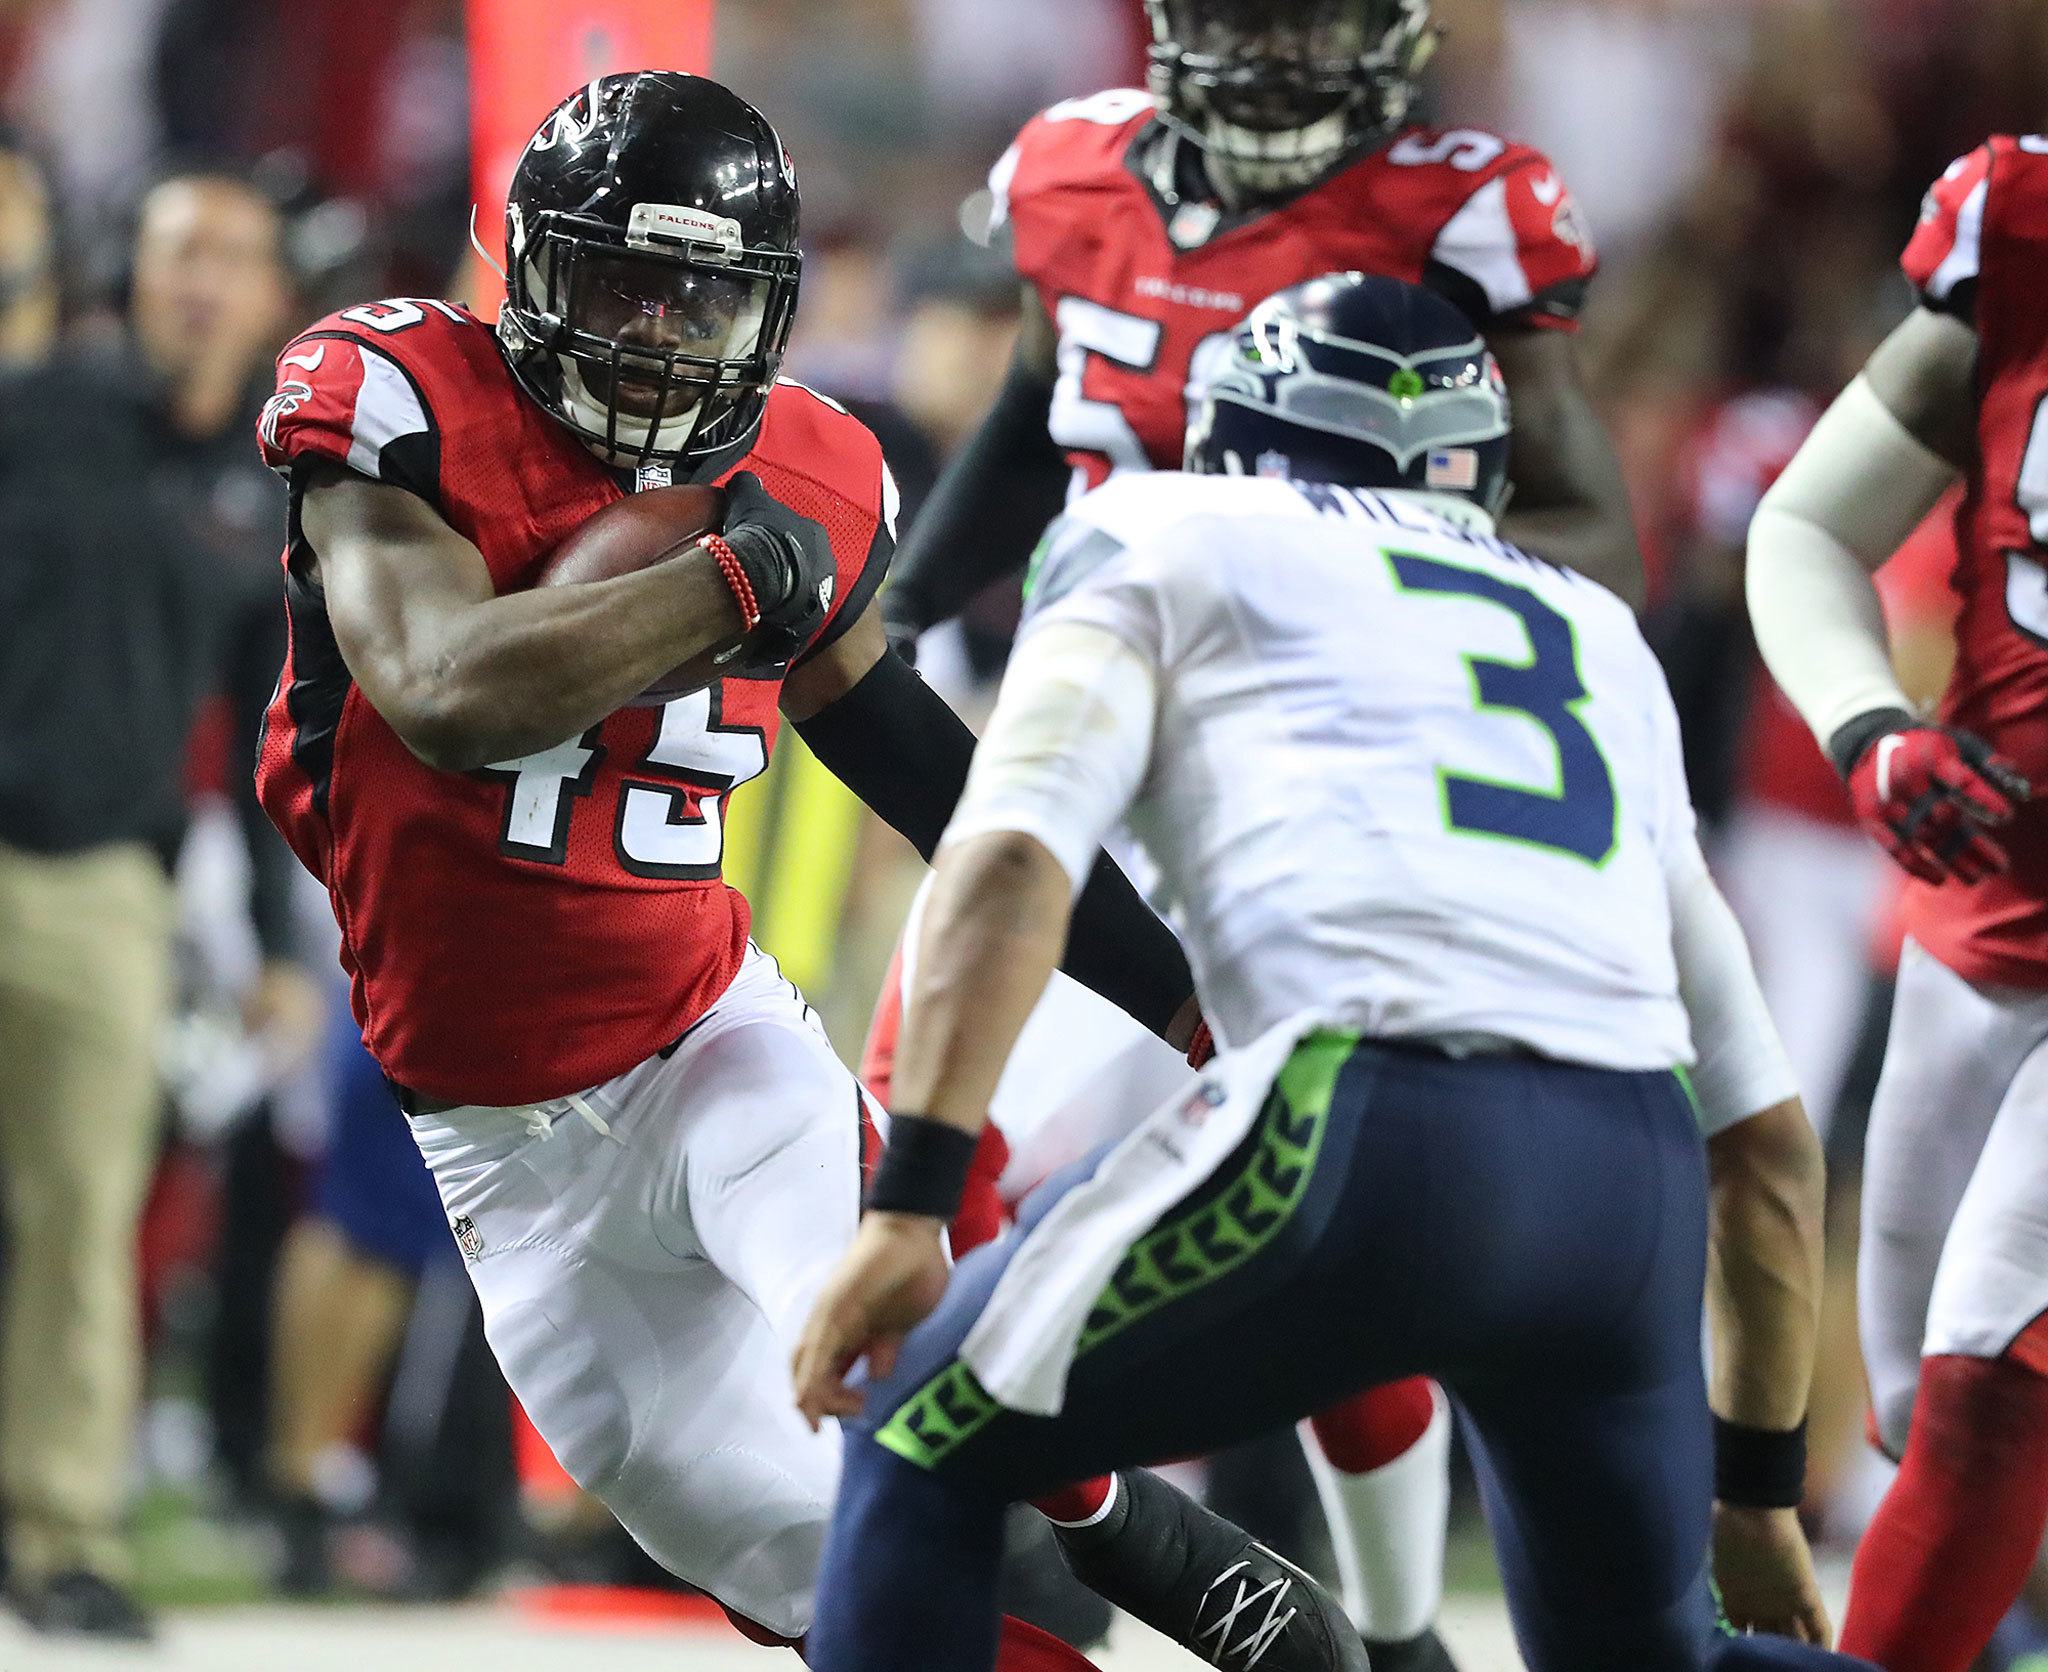 (Curtis Compton | Atlanta Journal-Constitution) Atlanta Falcons linebacker Deion Jones intercepted Seattle Seahawks quarterback Russell Wilson, who tried to make the tackle on Jones’ return run in the final minutes of the NFC Divisional Playoff on Saturday at the Georgia Dome in Atlanta. The Falcons won, 36-20.